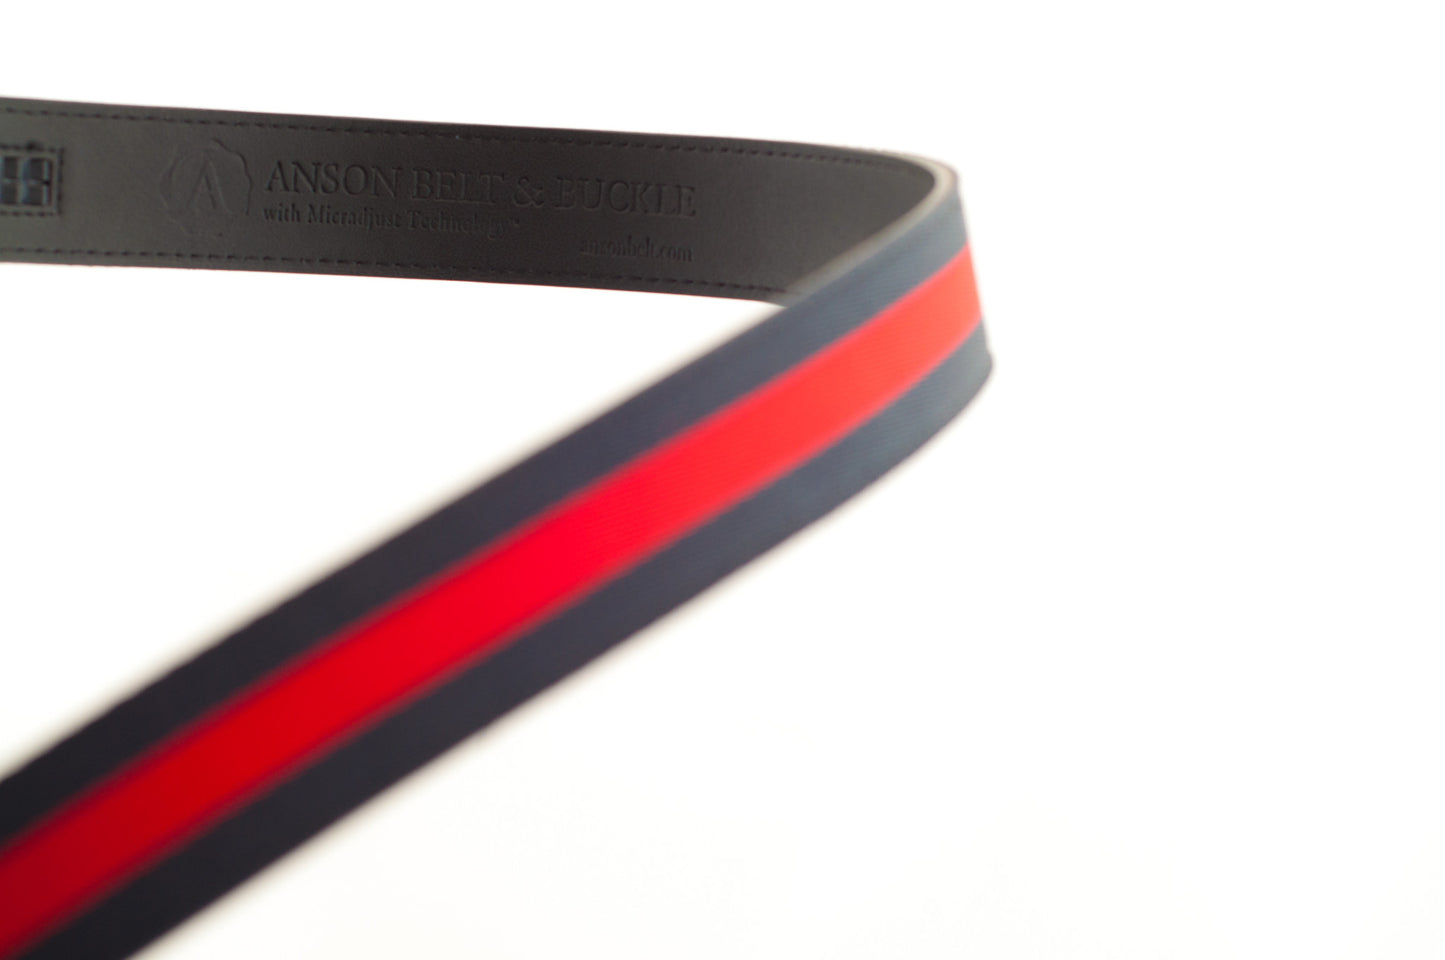 Men's cloth belt strap in navy-red stripe with a 1.25-inch width, casual look, anson belt brand name and logo on the back